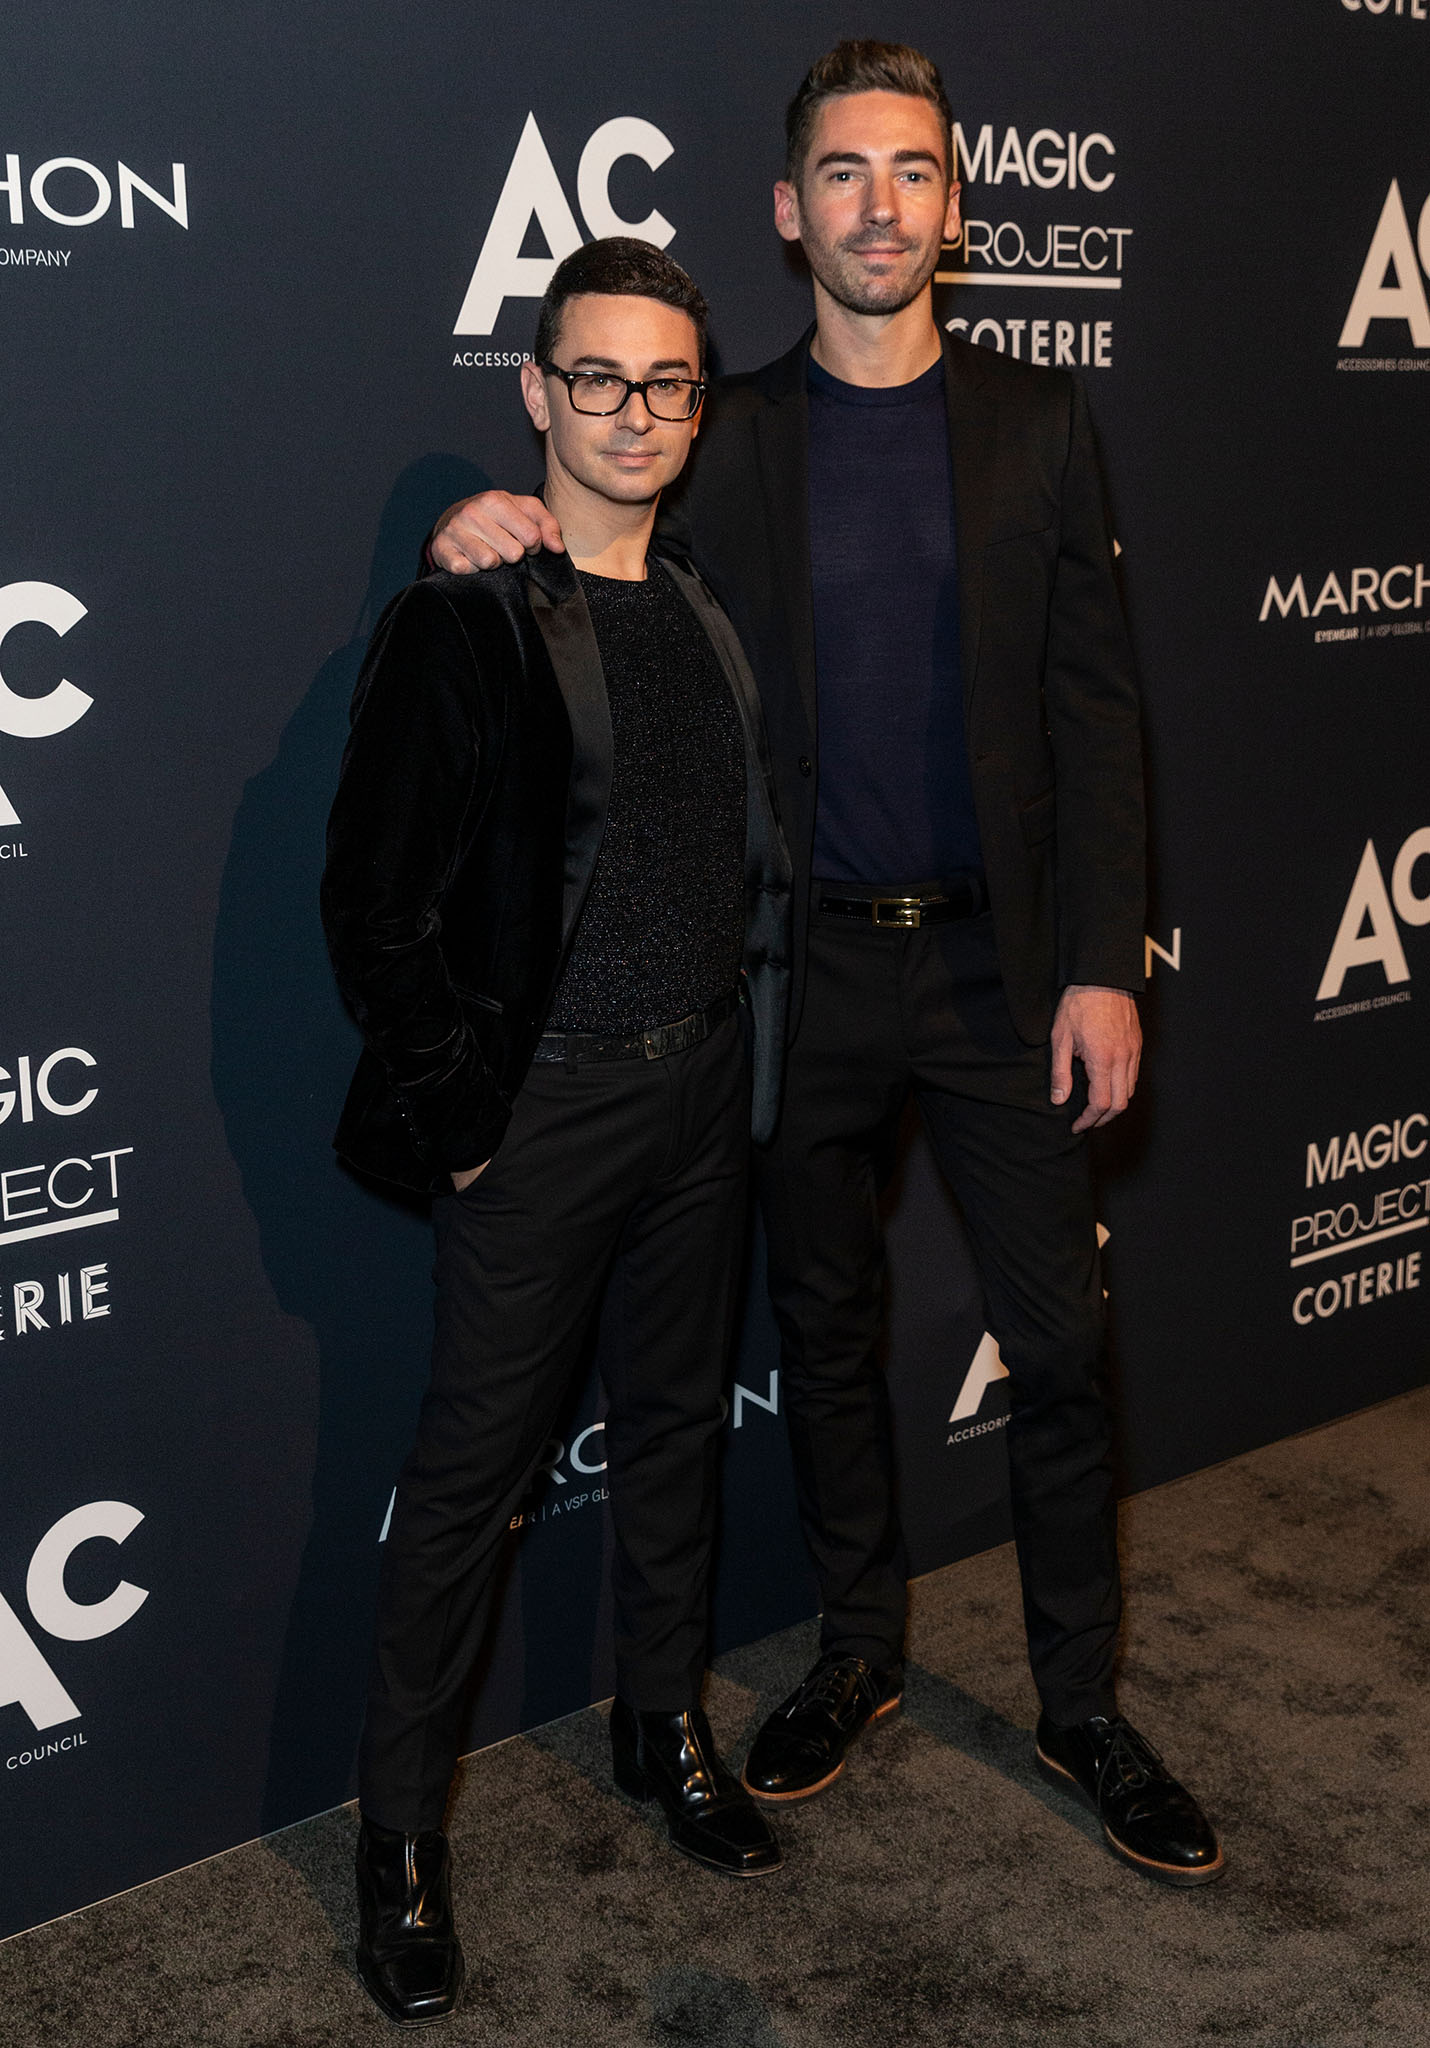 Christian Siriano is now dating Kyle Smith, fashion designer and founder of New York-based clothing collection, Future Lovers of Tomorrow